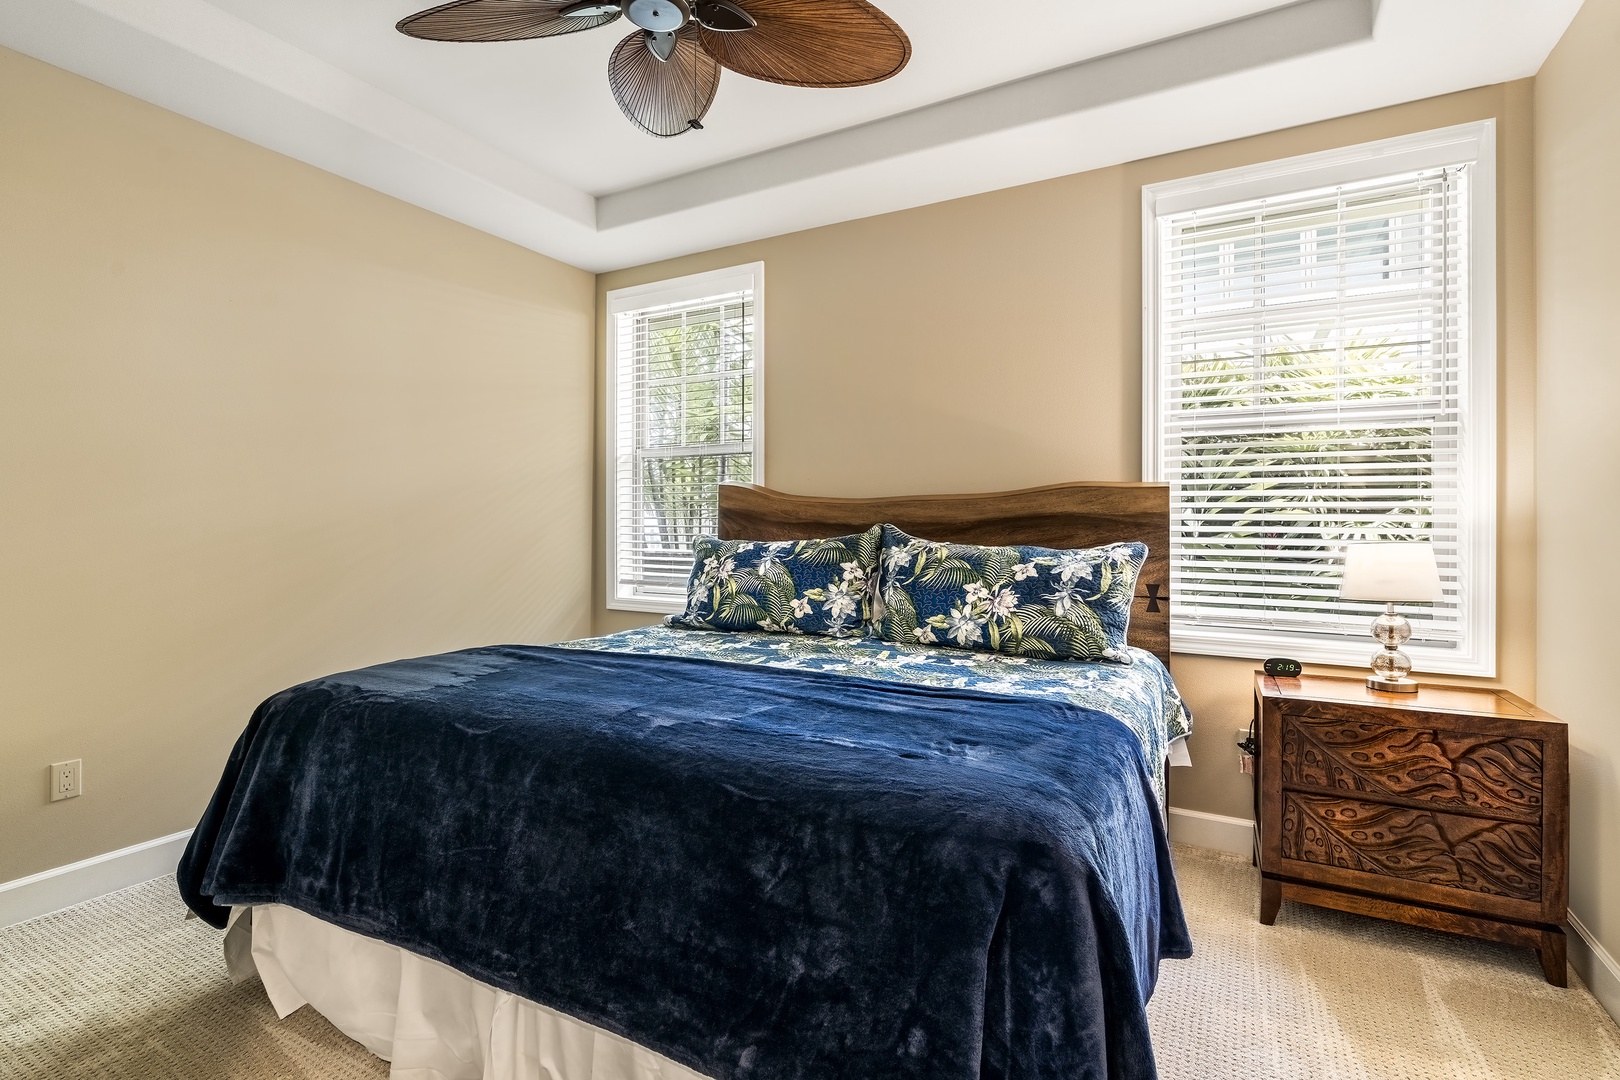 Kailua Kona Vacation Rentals, Green/Blue Combo - Guest bedroom equipped with King bed, A/C, and TV